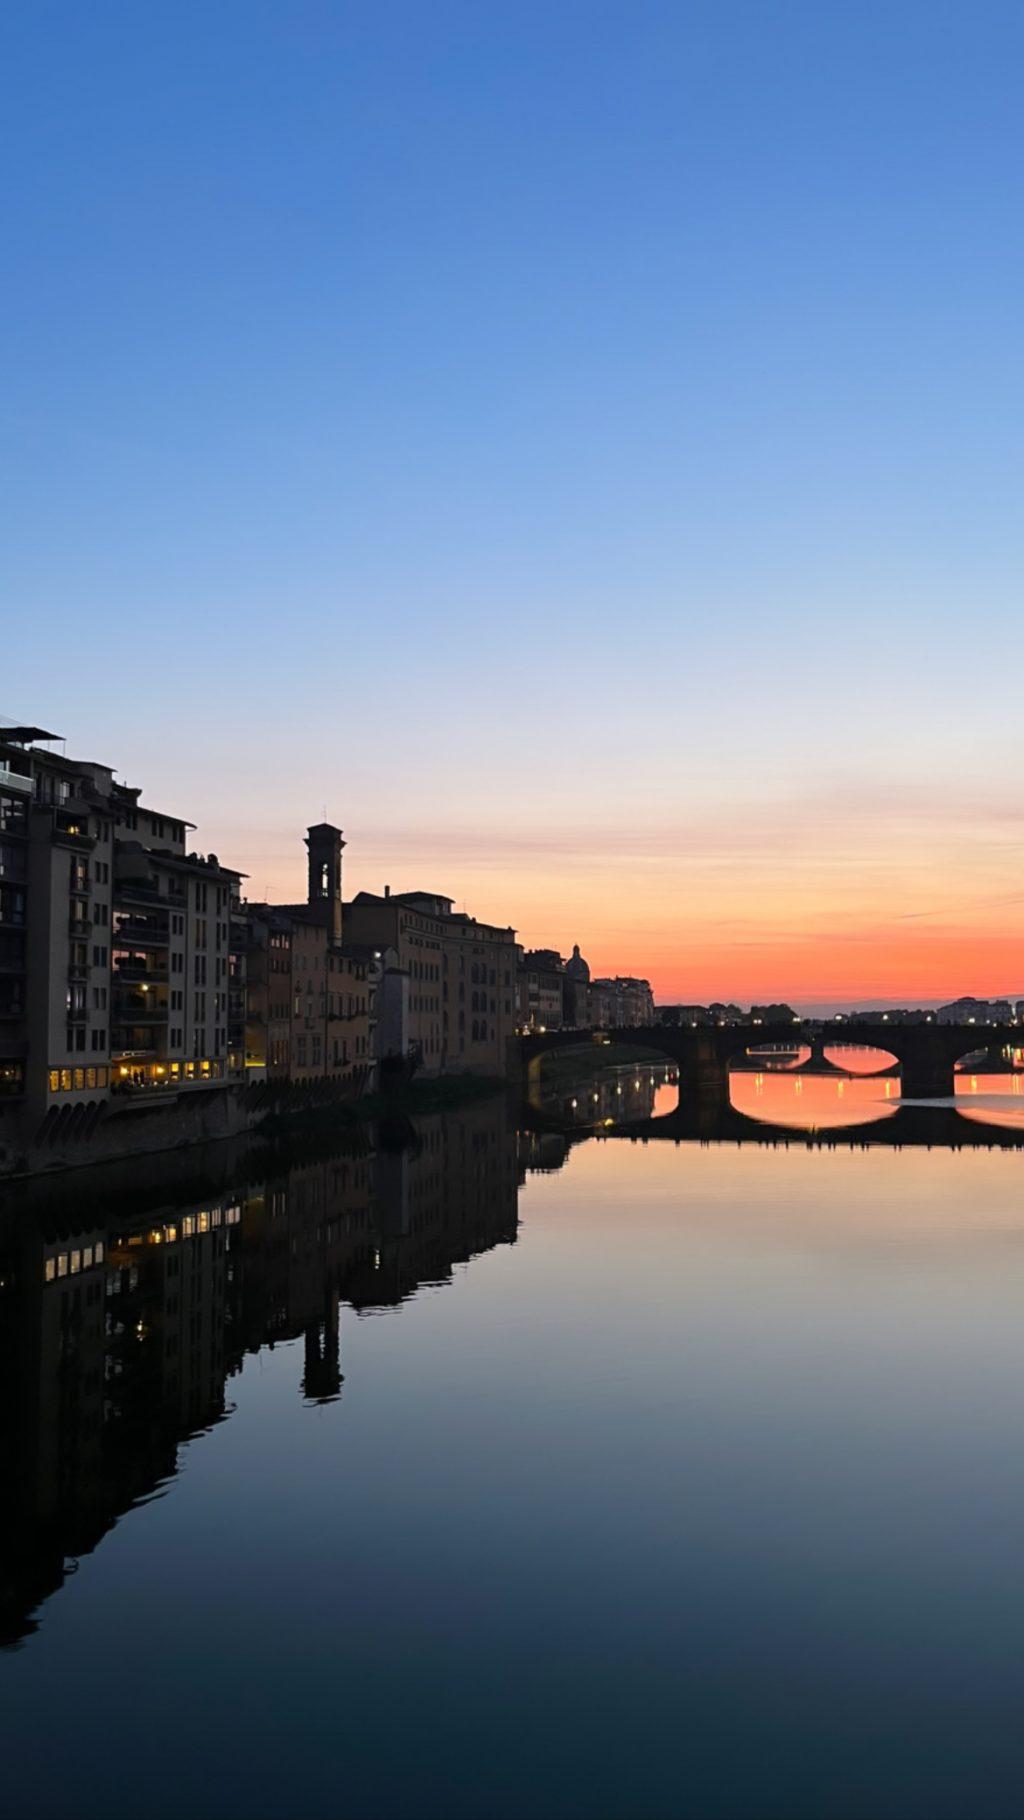 The Arno River at sunset in Florence. Students could explore the city in the evenings when classes were over.